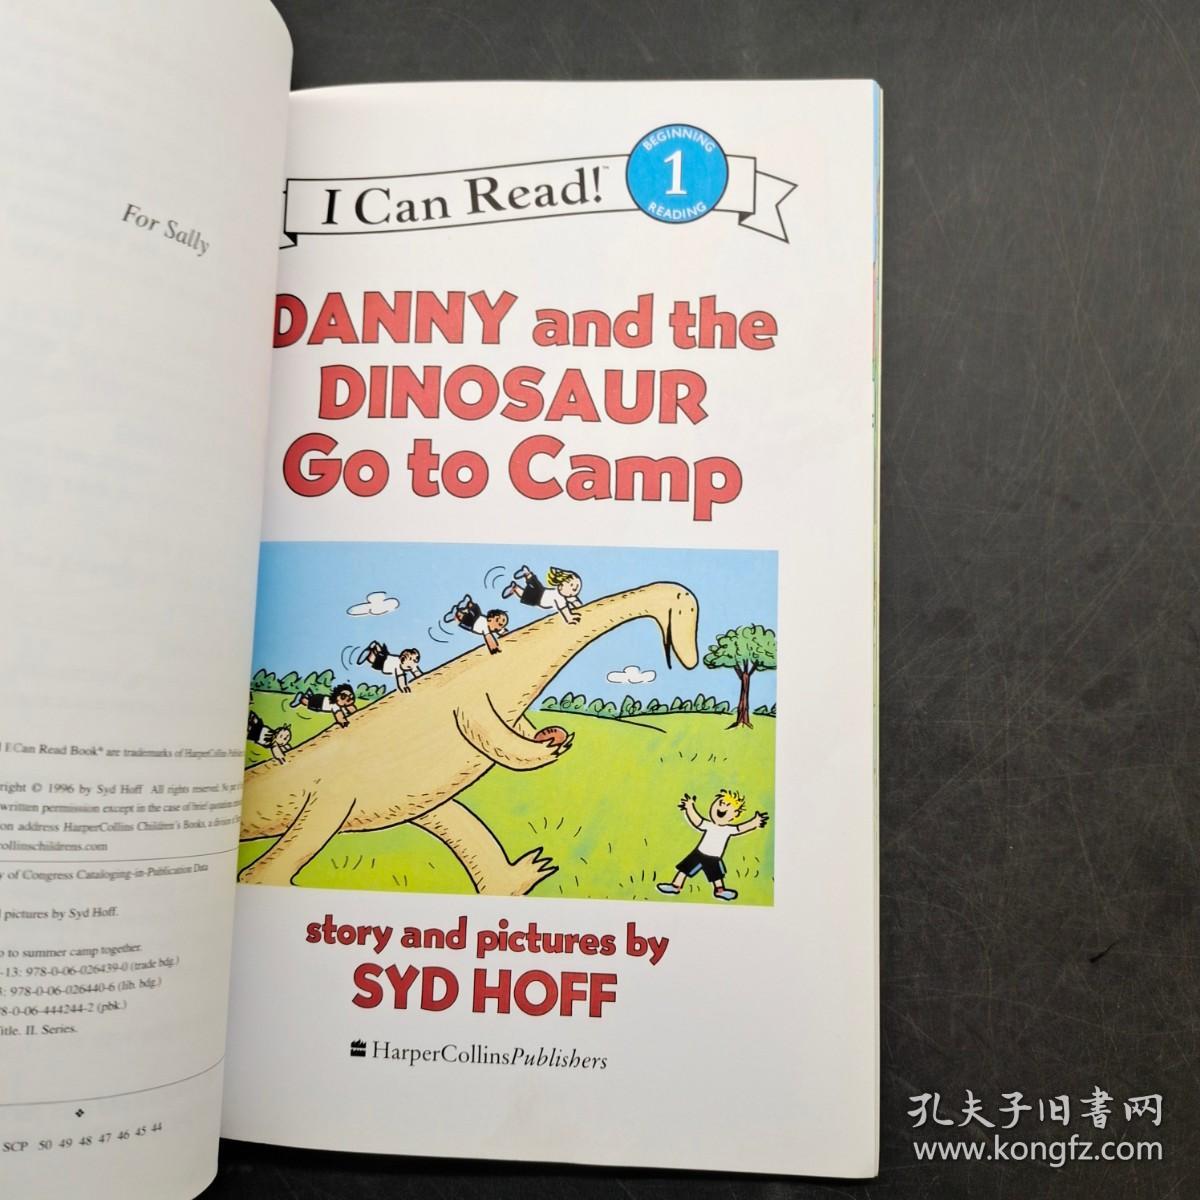 I Can Read! DANNY and the DINOSAUR Go to Camp